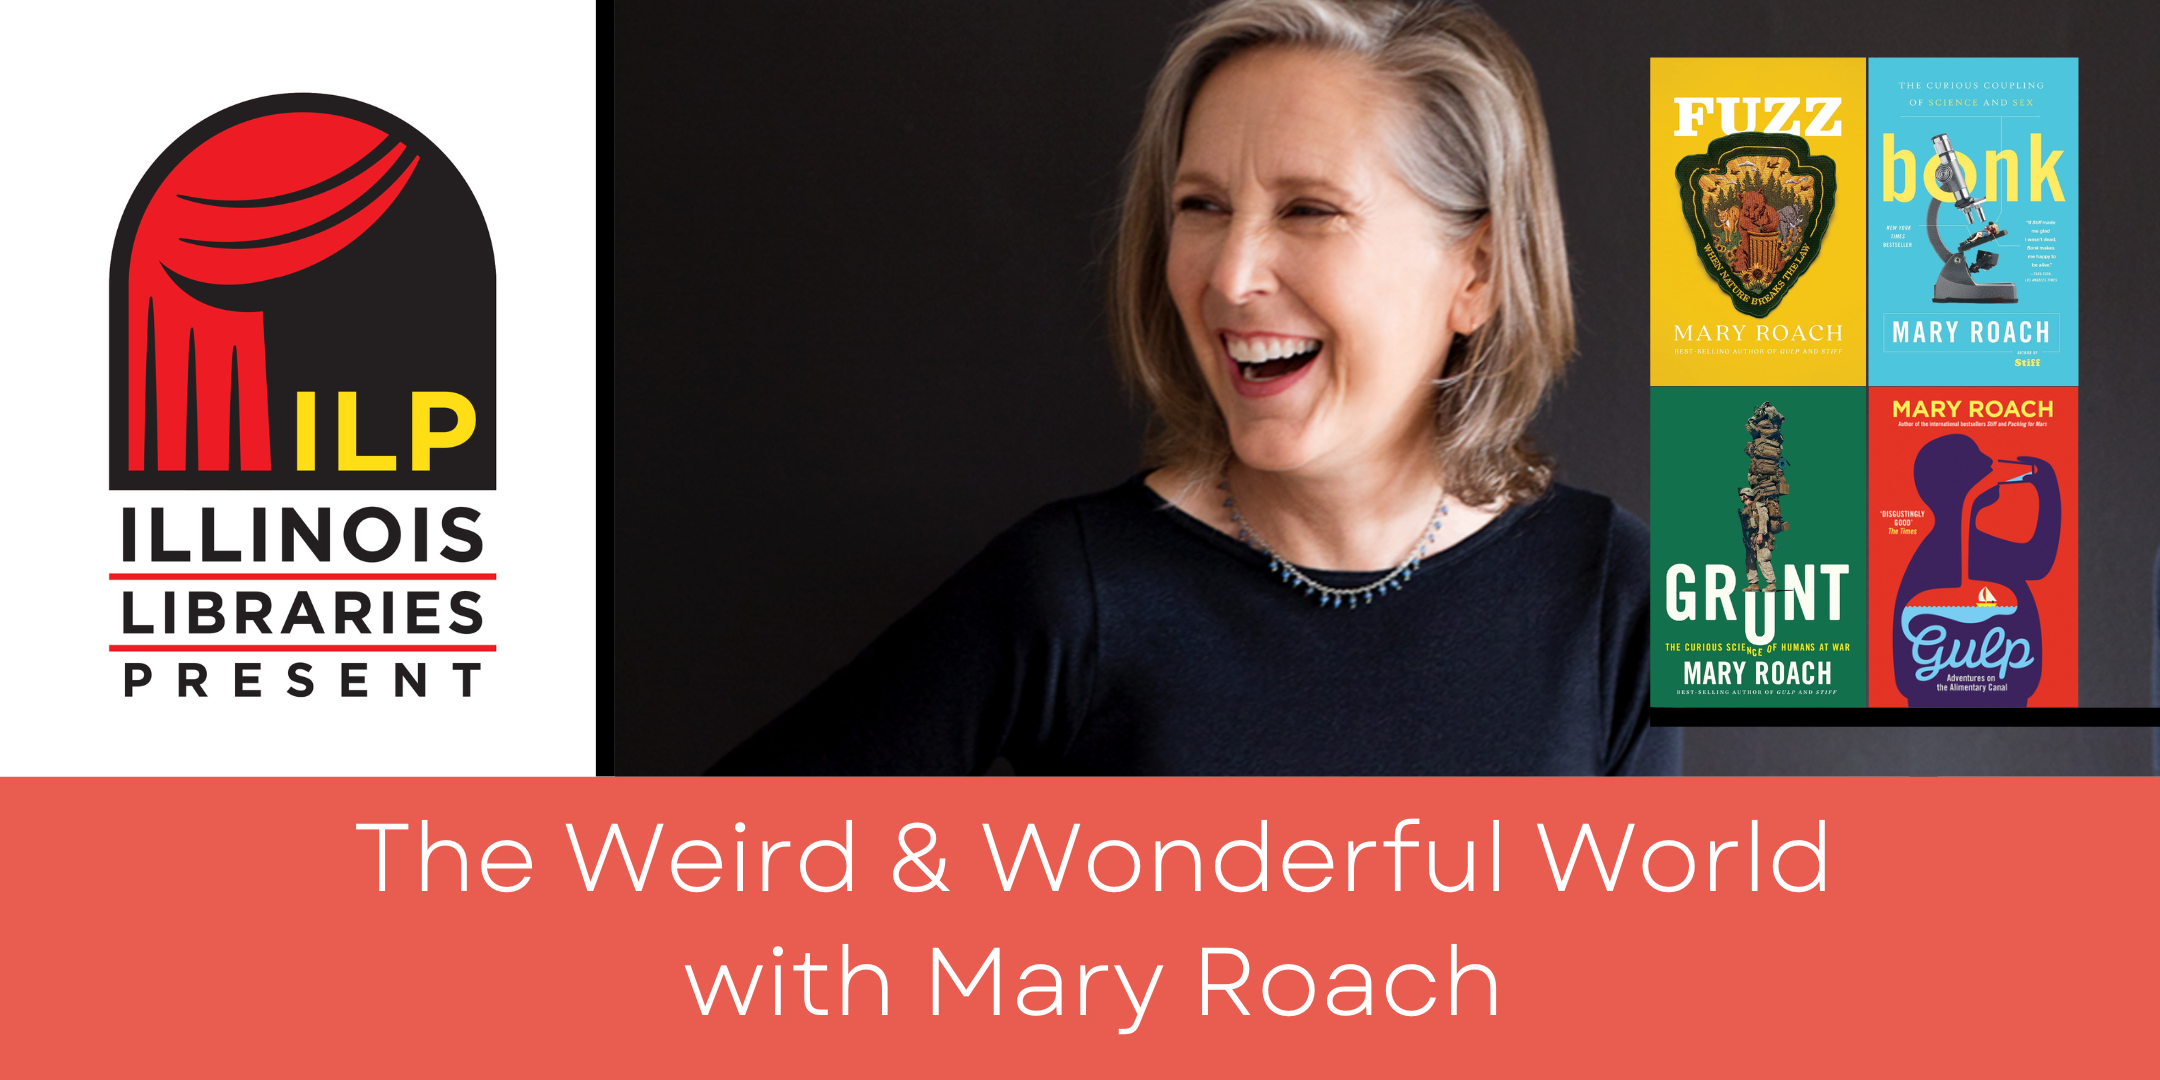 image of "The Weird & Wonderful World with Mary Roach"